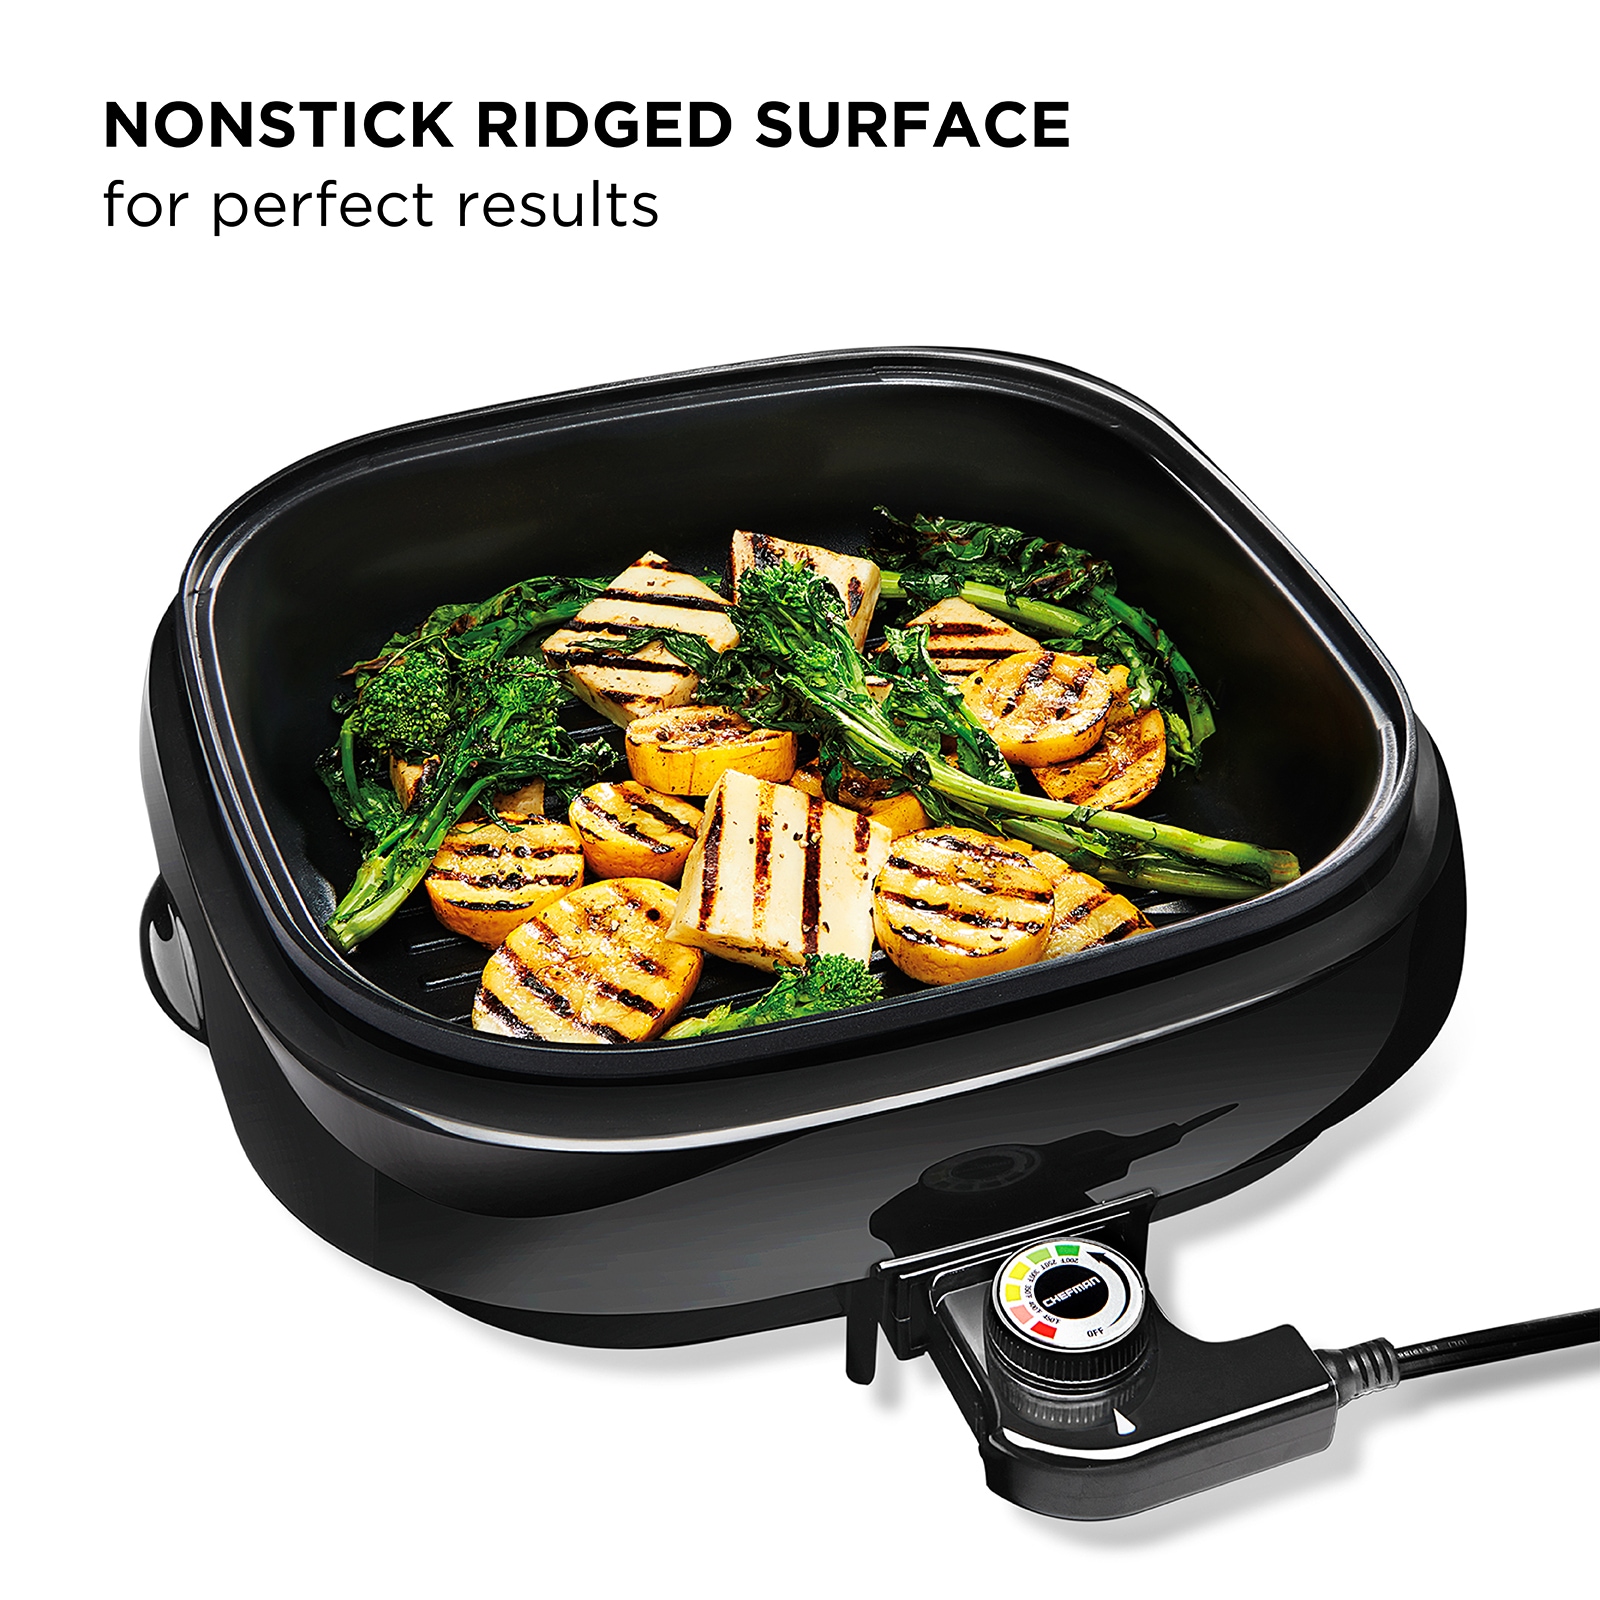 Elite Gourmet 14 inch Smokeless Indoor Electric BBQ Nonstick Grill with Glass Lid, Dishwasher Safe, Black Emg-980b